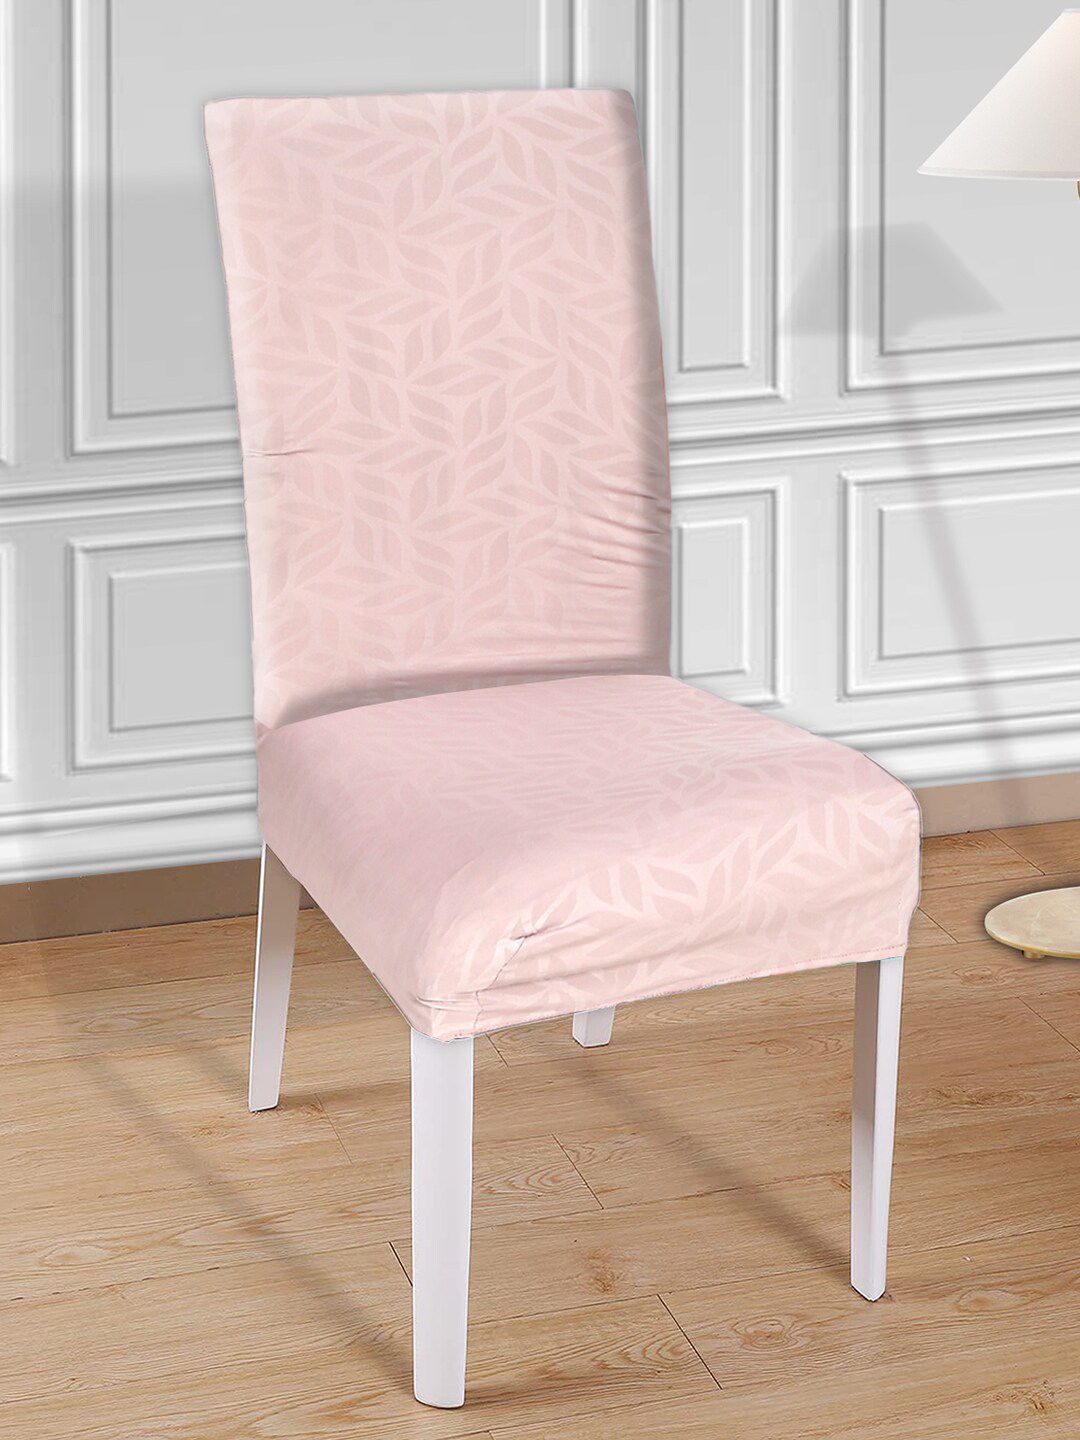 Kuber Industries Set Of 4 Pink Printed Chair Covers Price in India